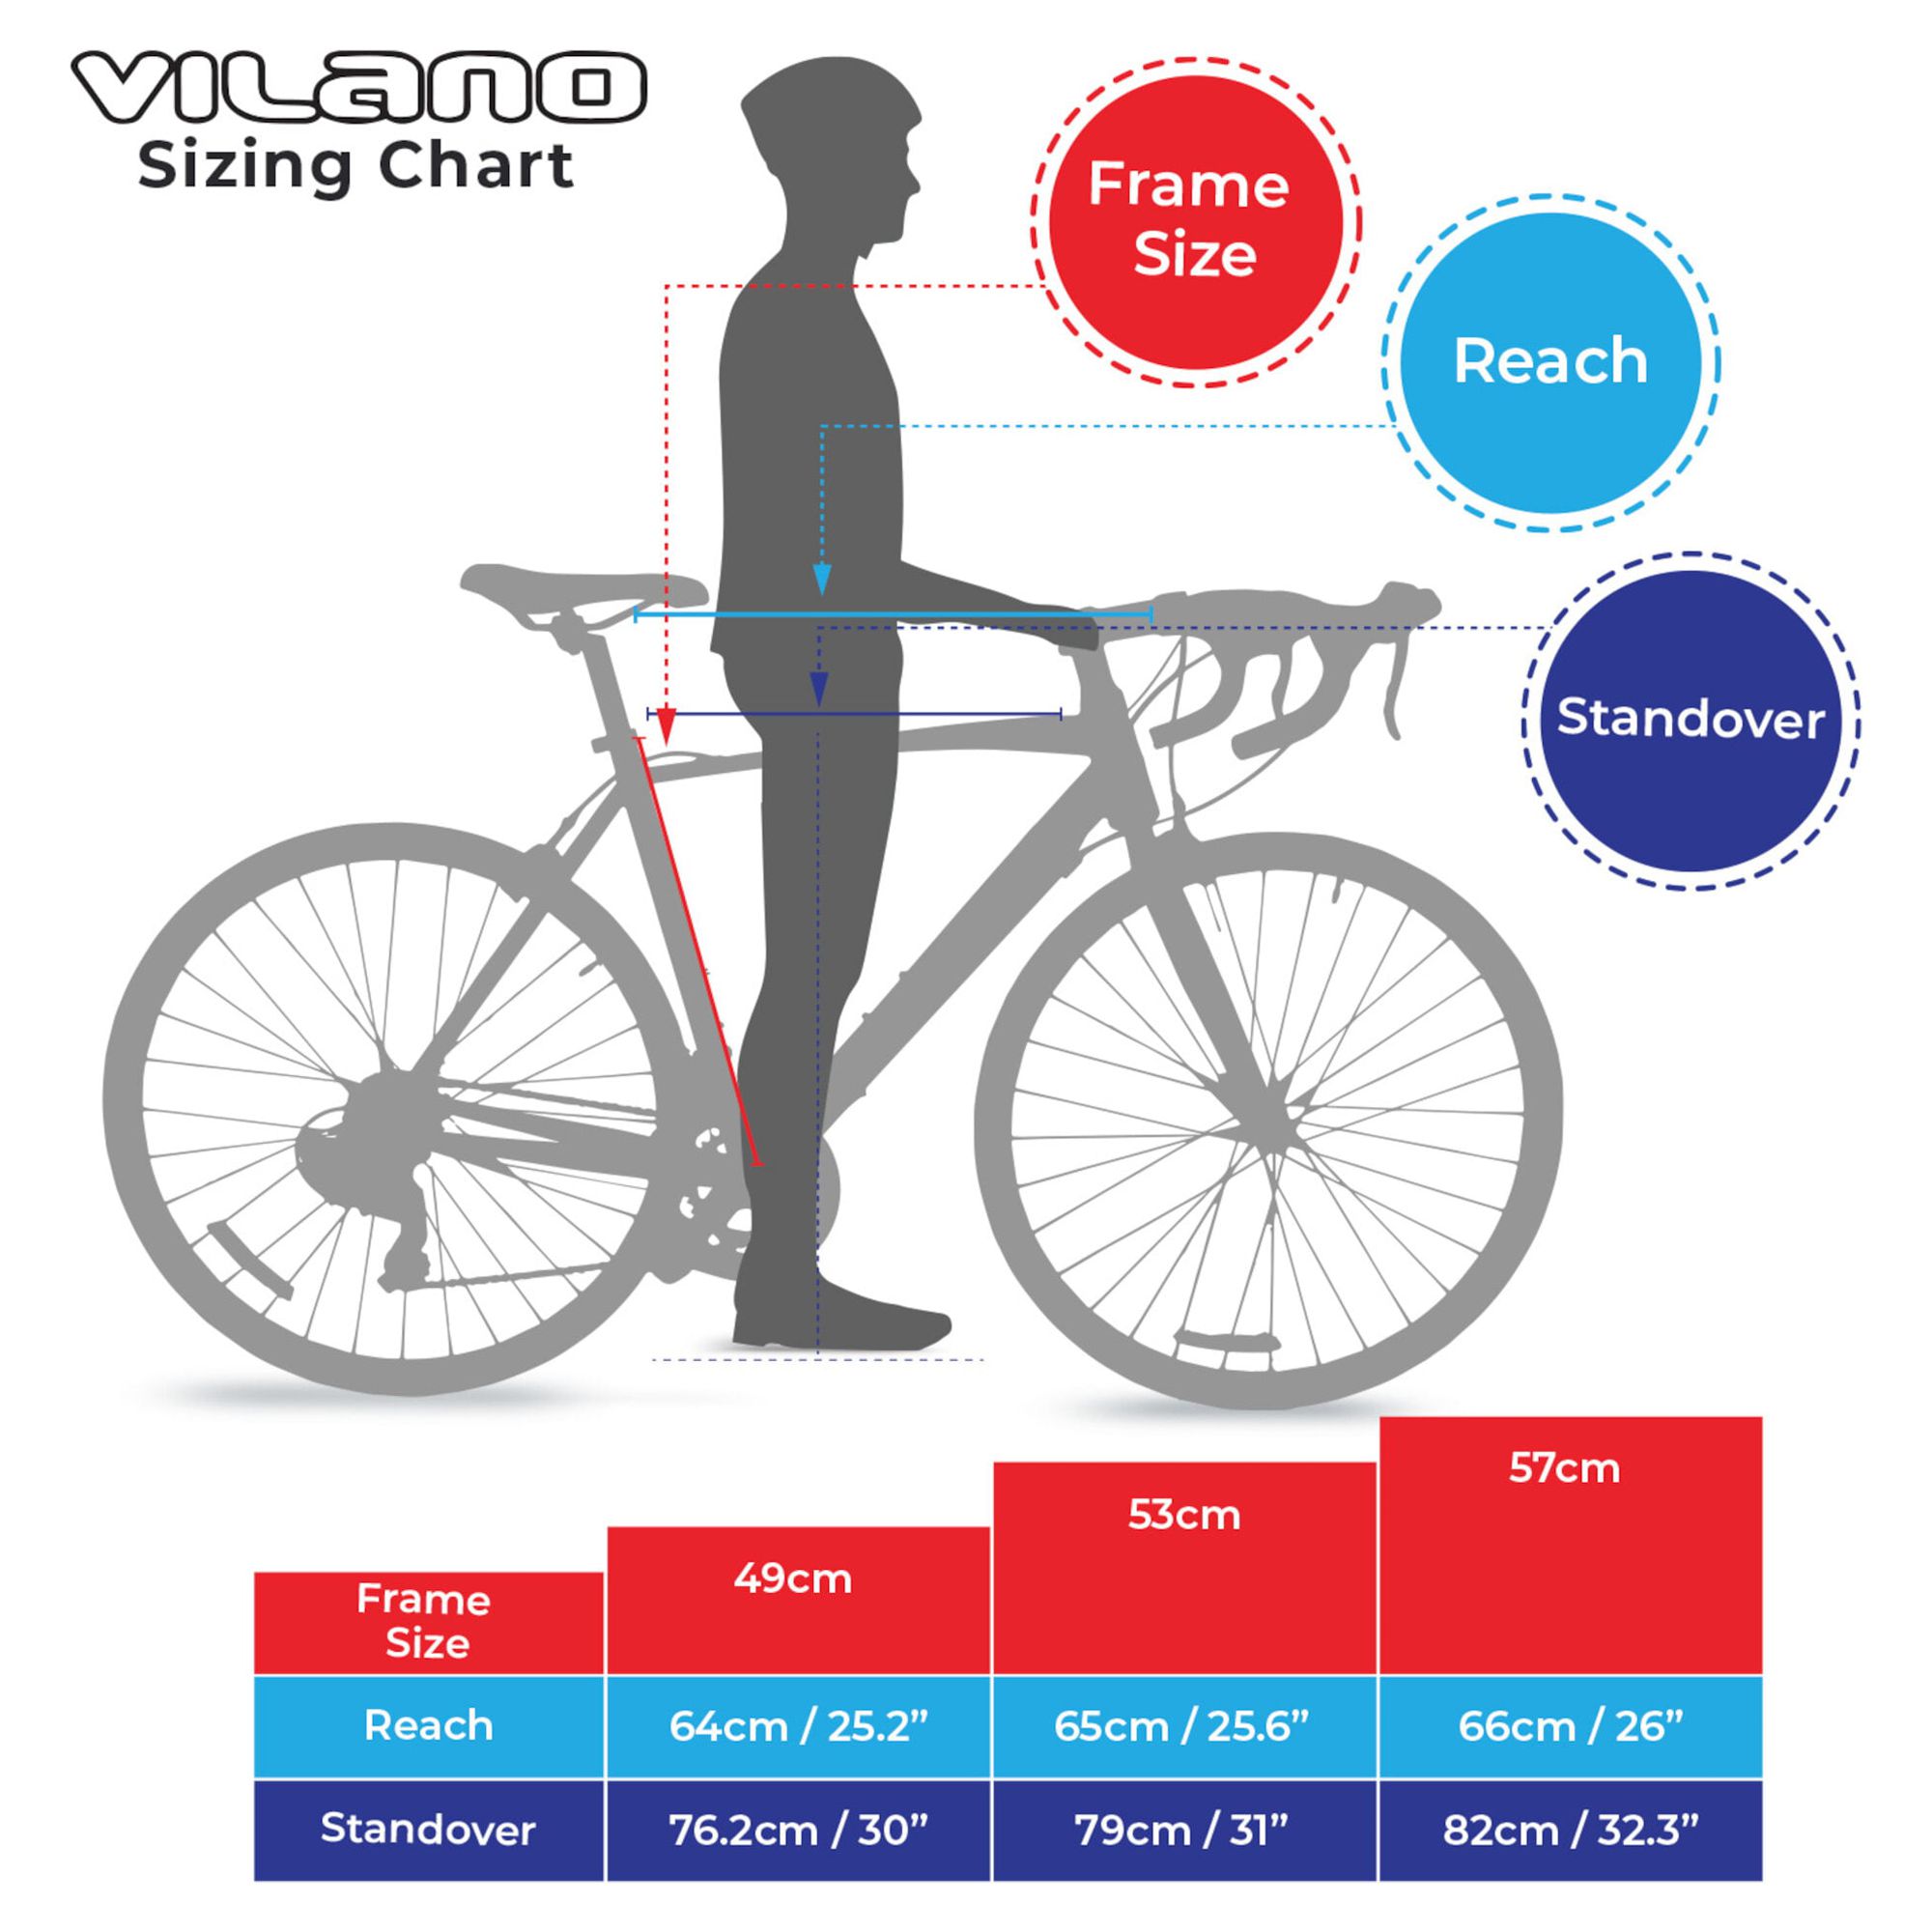 Vilano Shadow 3.0 Road Bike with Integrated Shifters - image 3 of 8